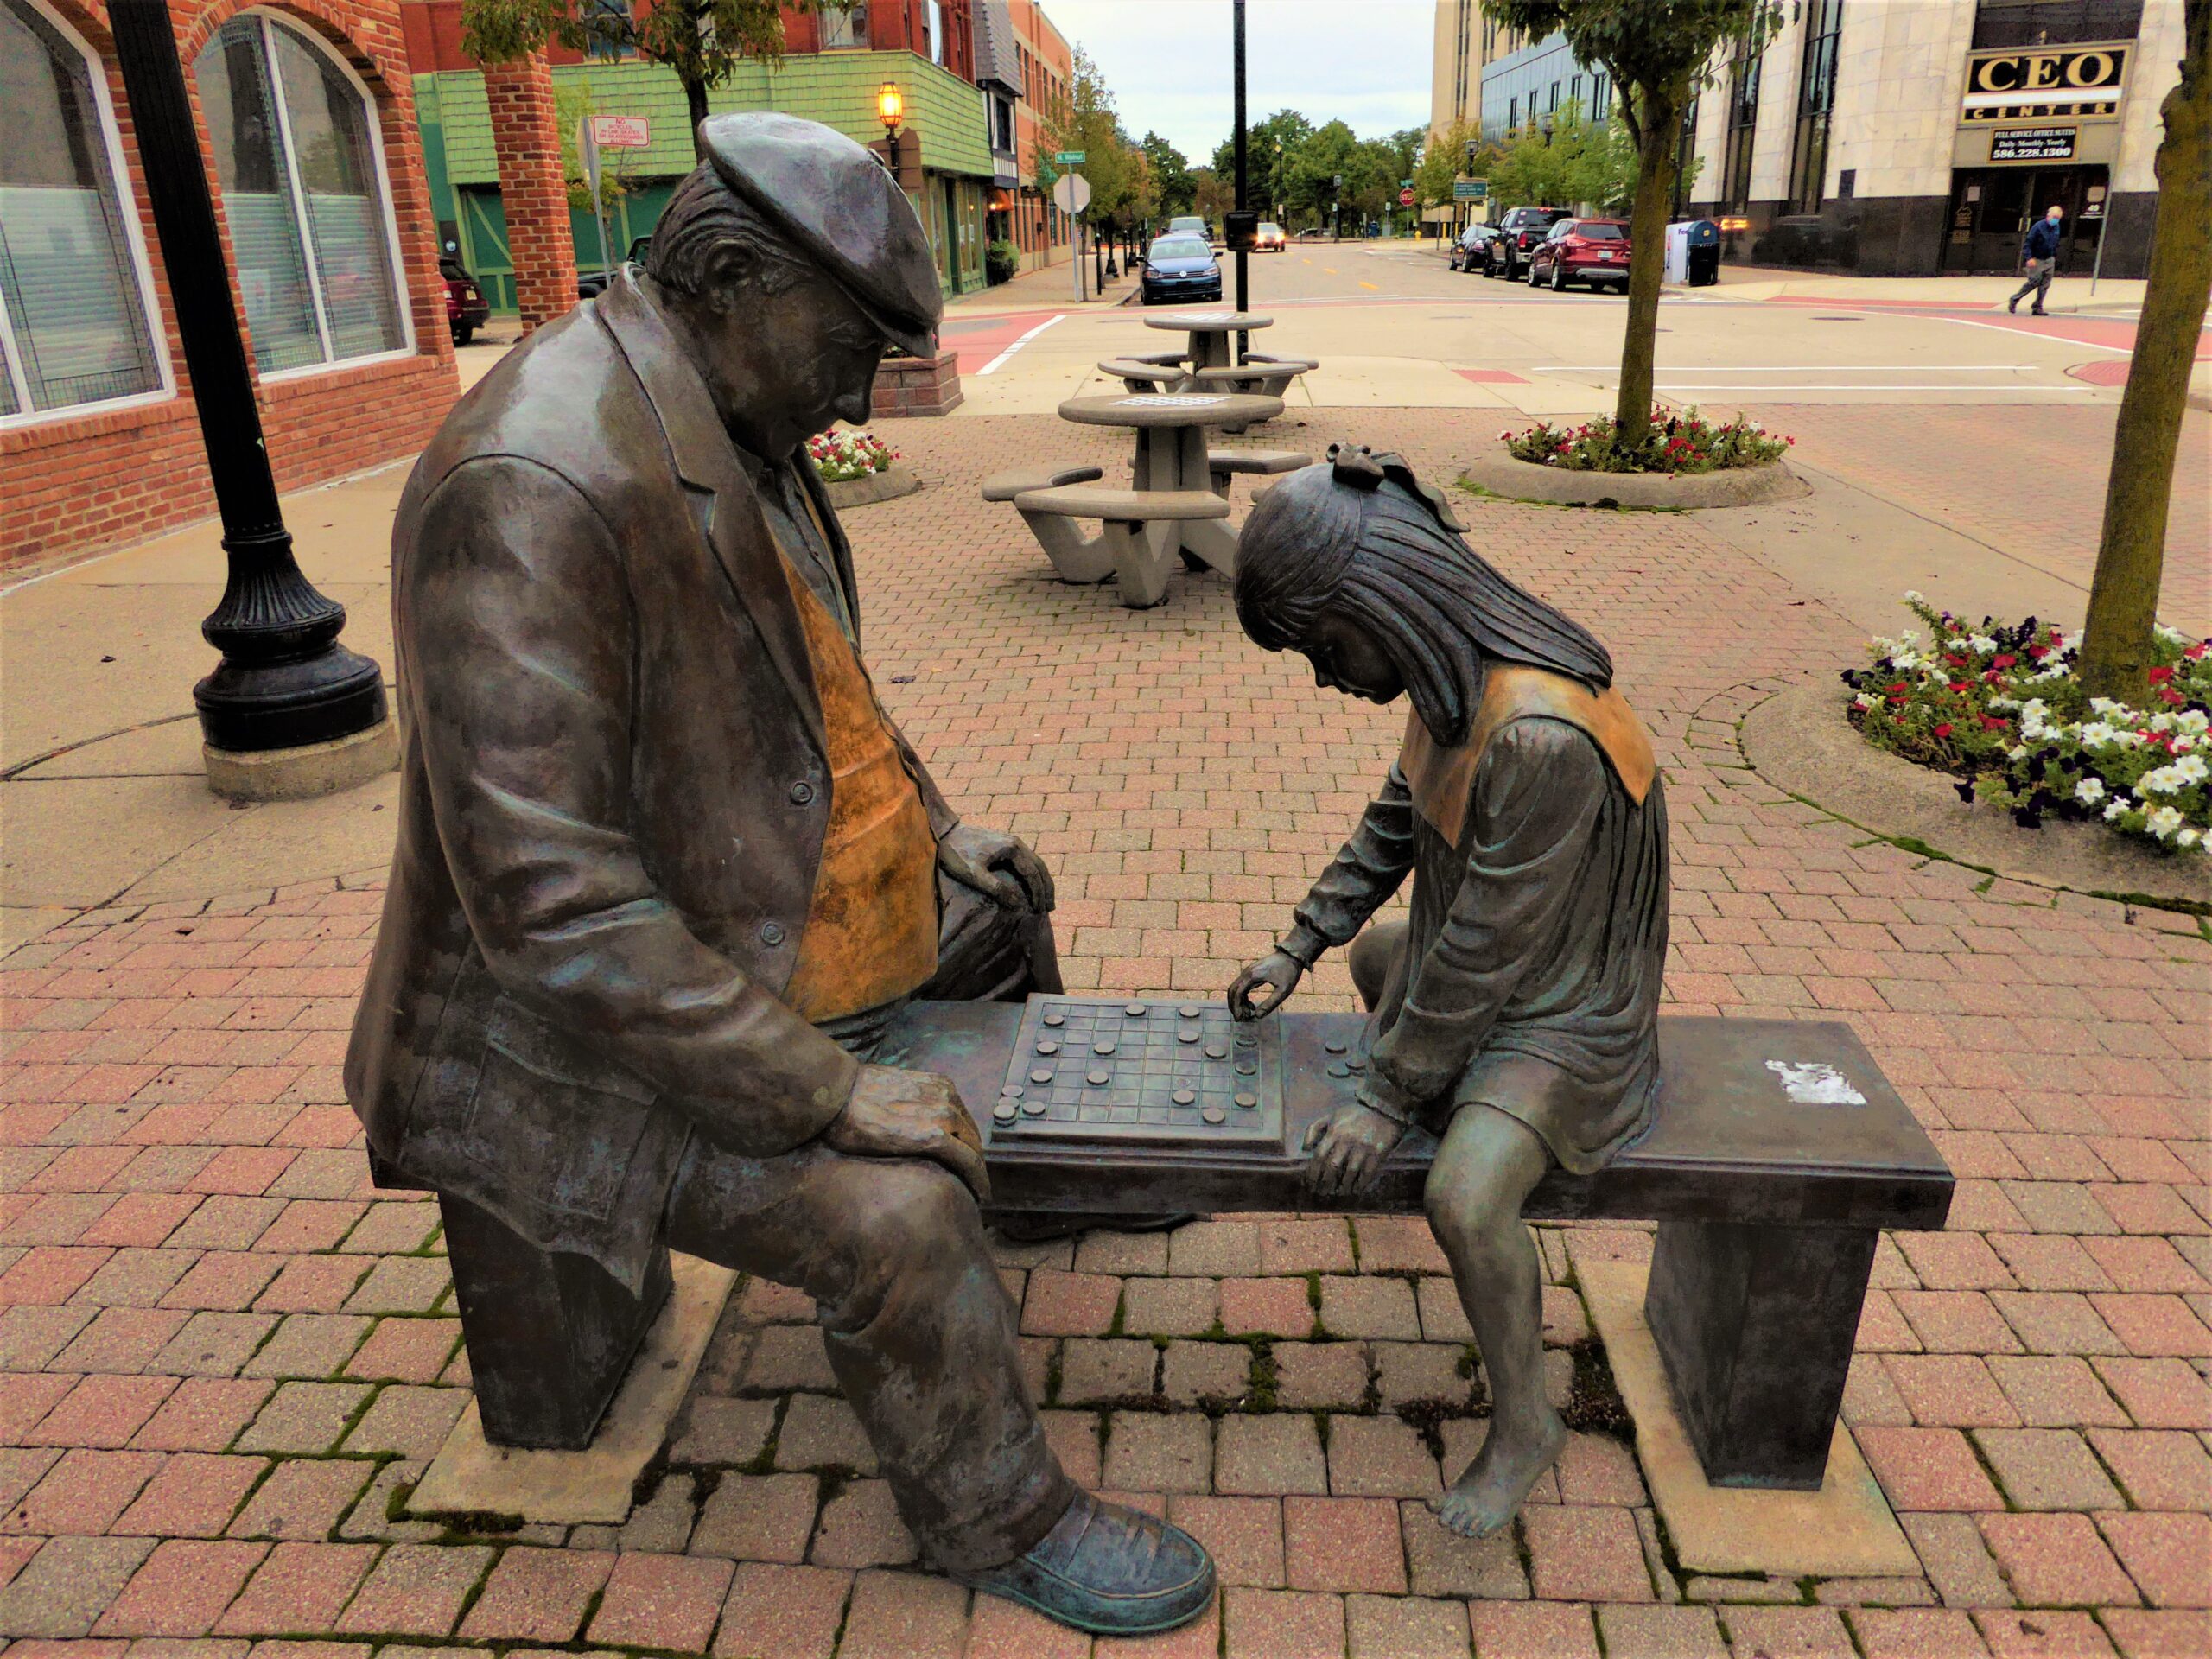 Photo of a sculpture of an older man playing checkers with a young girl, both are sitting on a bench.